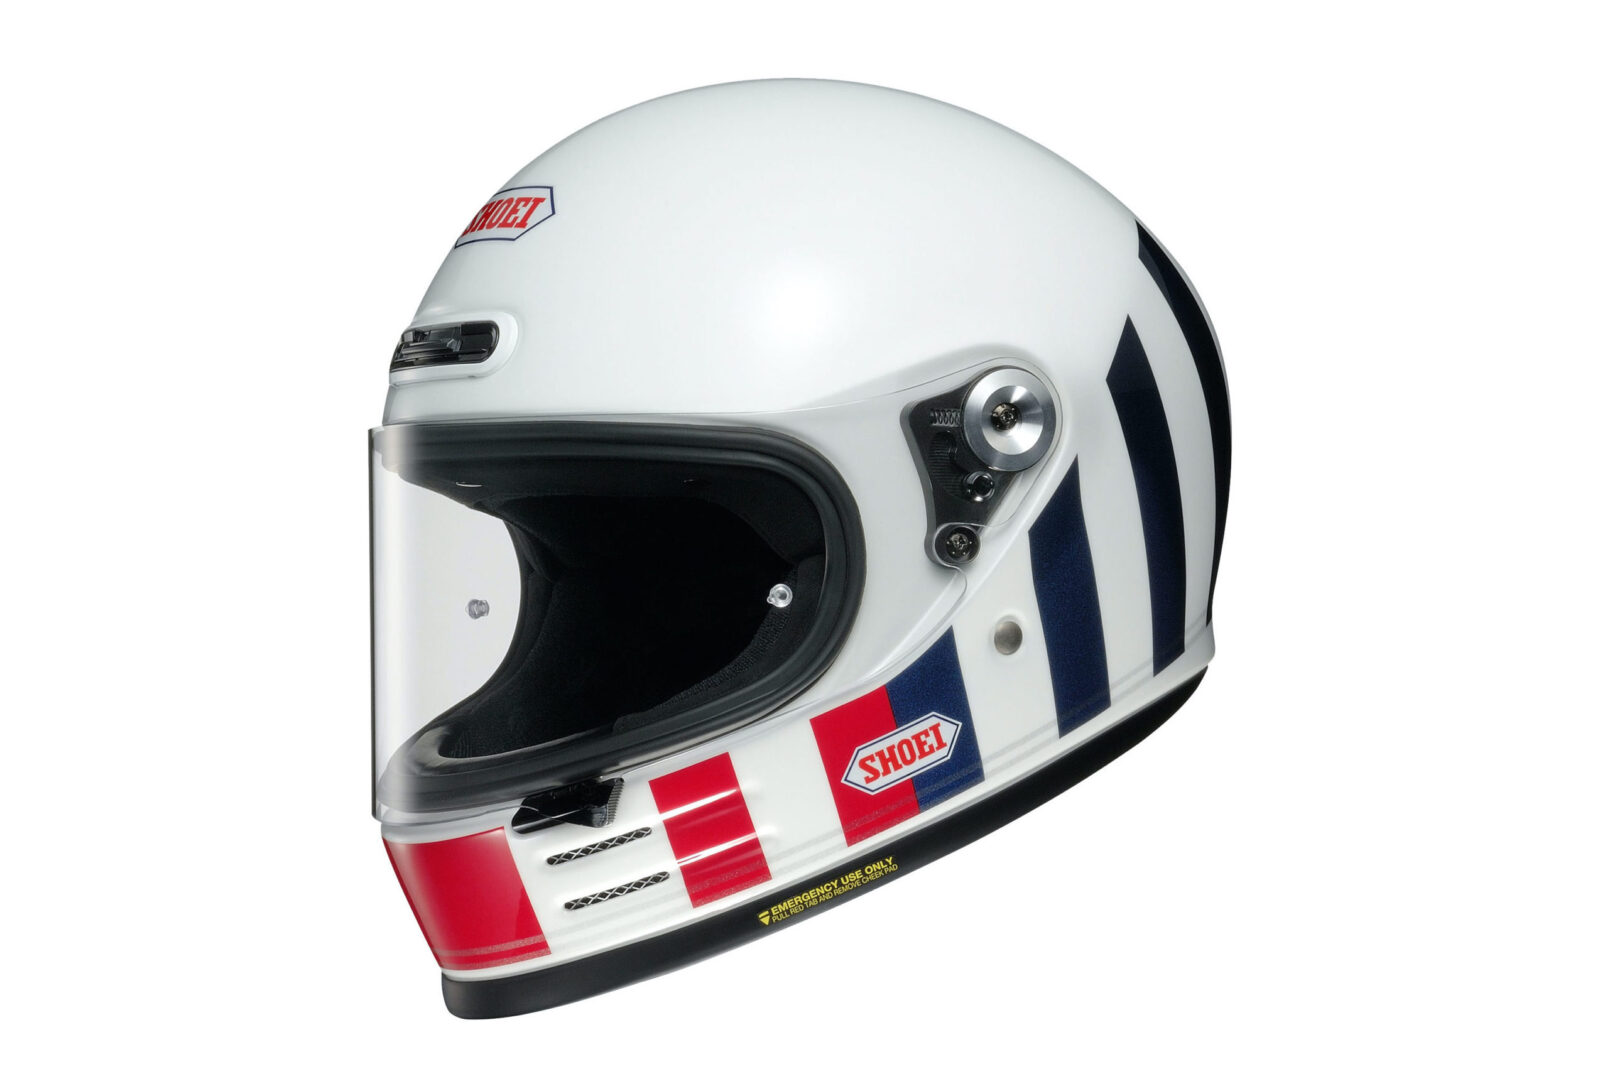 The New Shoei Glamster Helmet - Modern Protection With Retro Styling